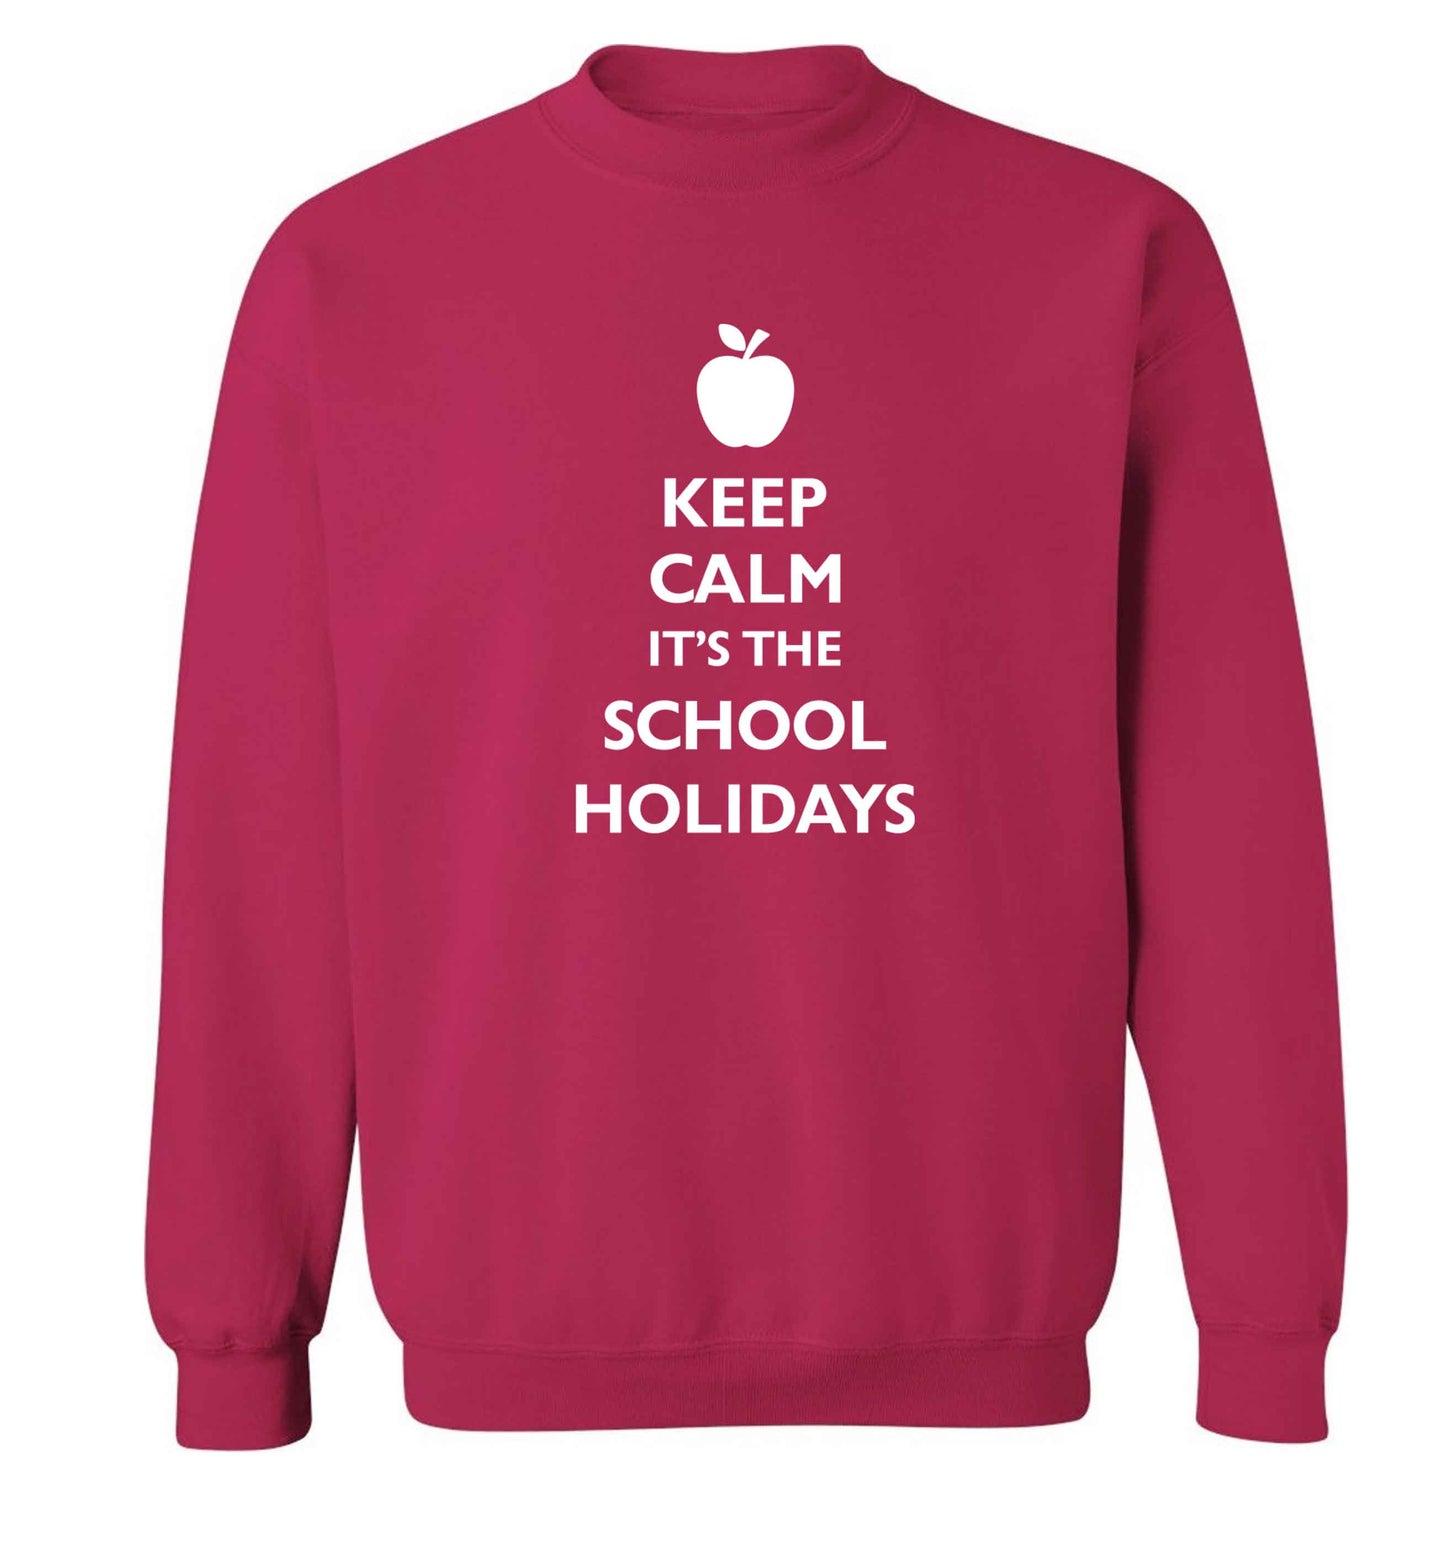 Keep calm it's the school holidays adult's unisex pink sweater 2XL